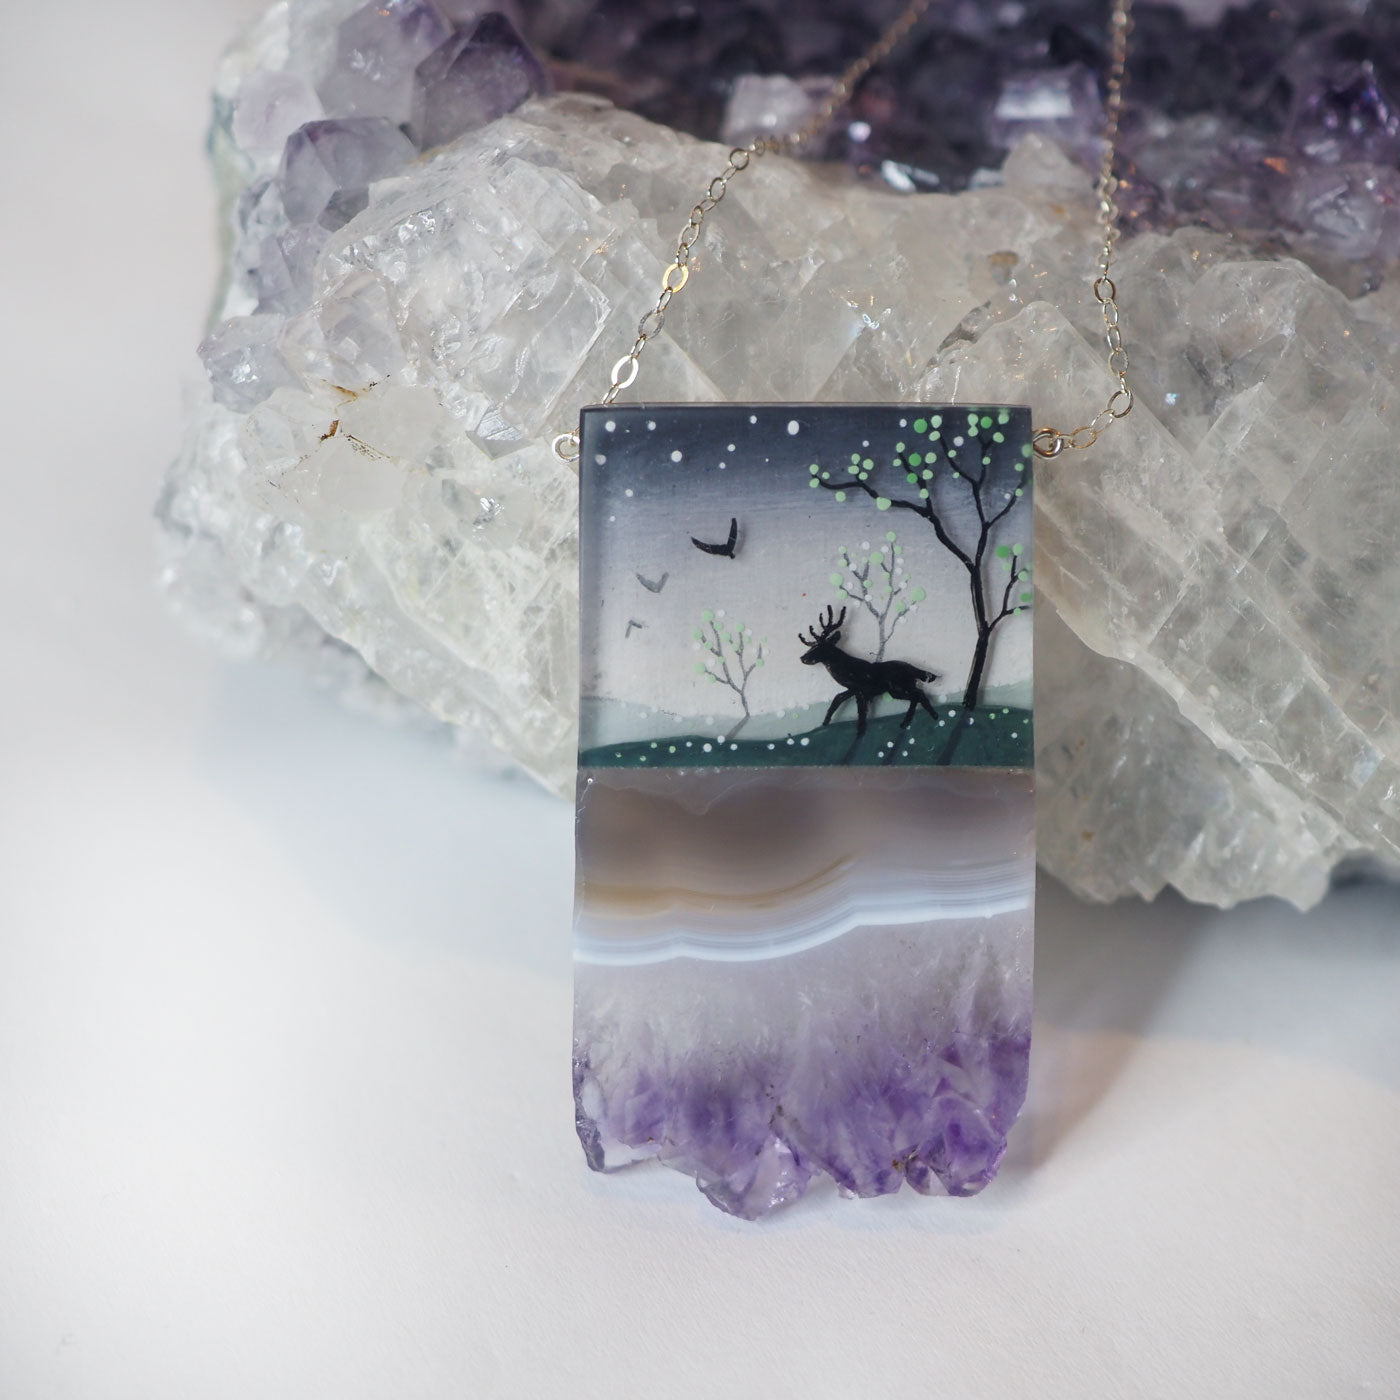 Hand-painted resin and amethyst slice necklace with a bird and deer in a forest scene